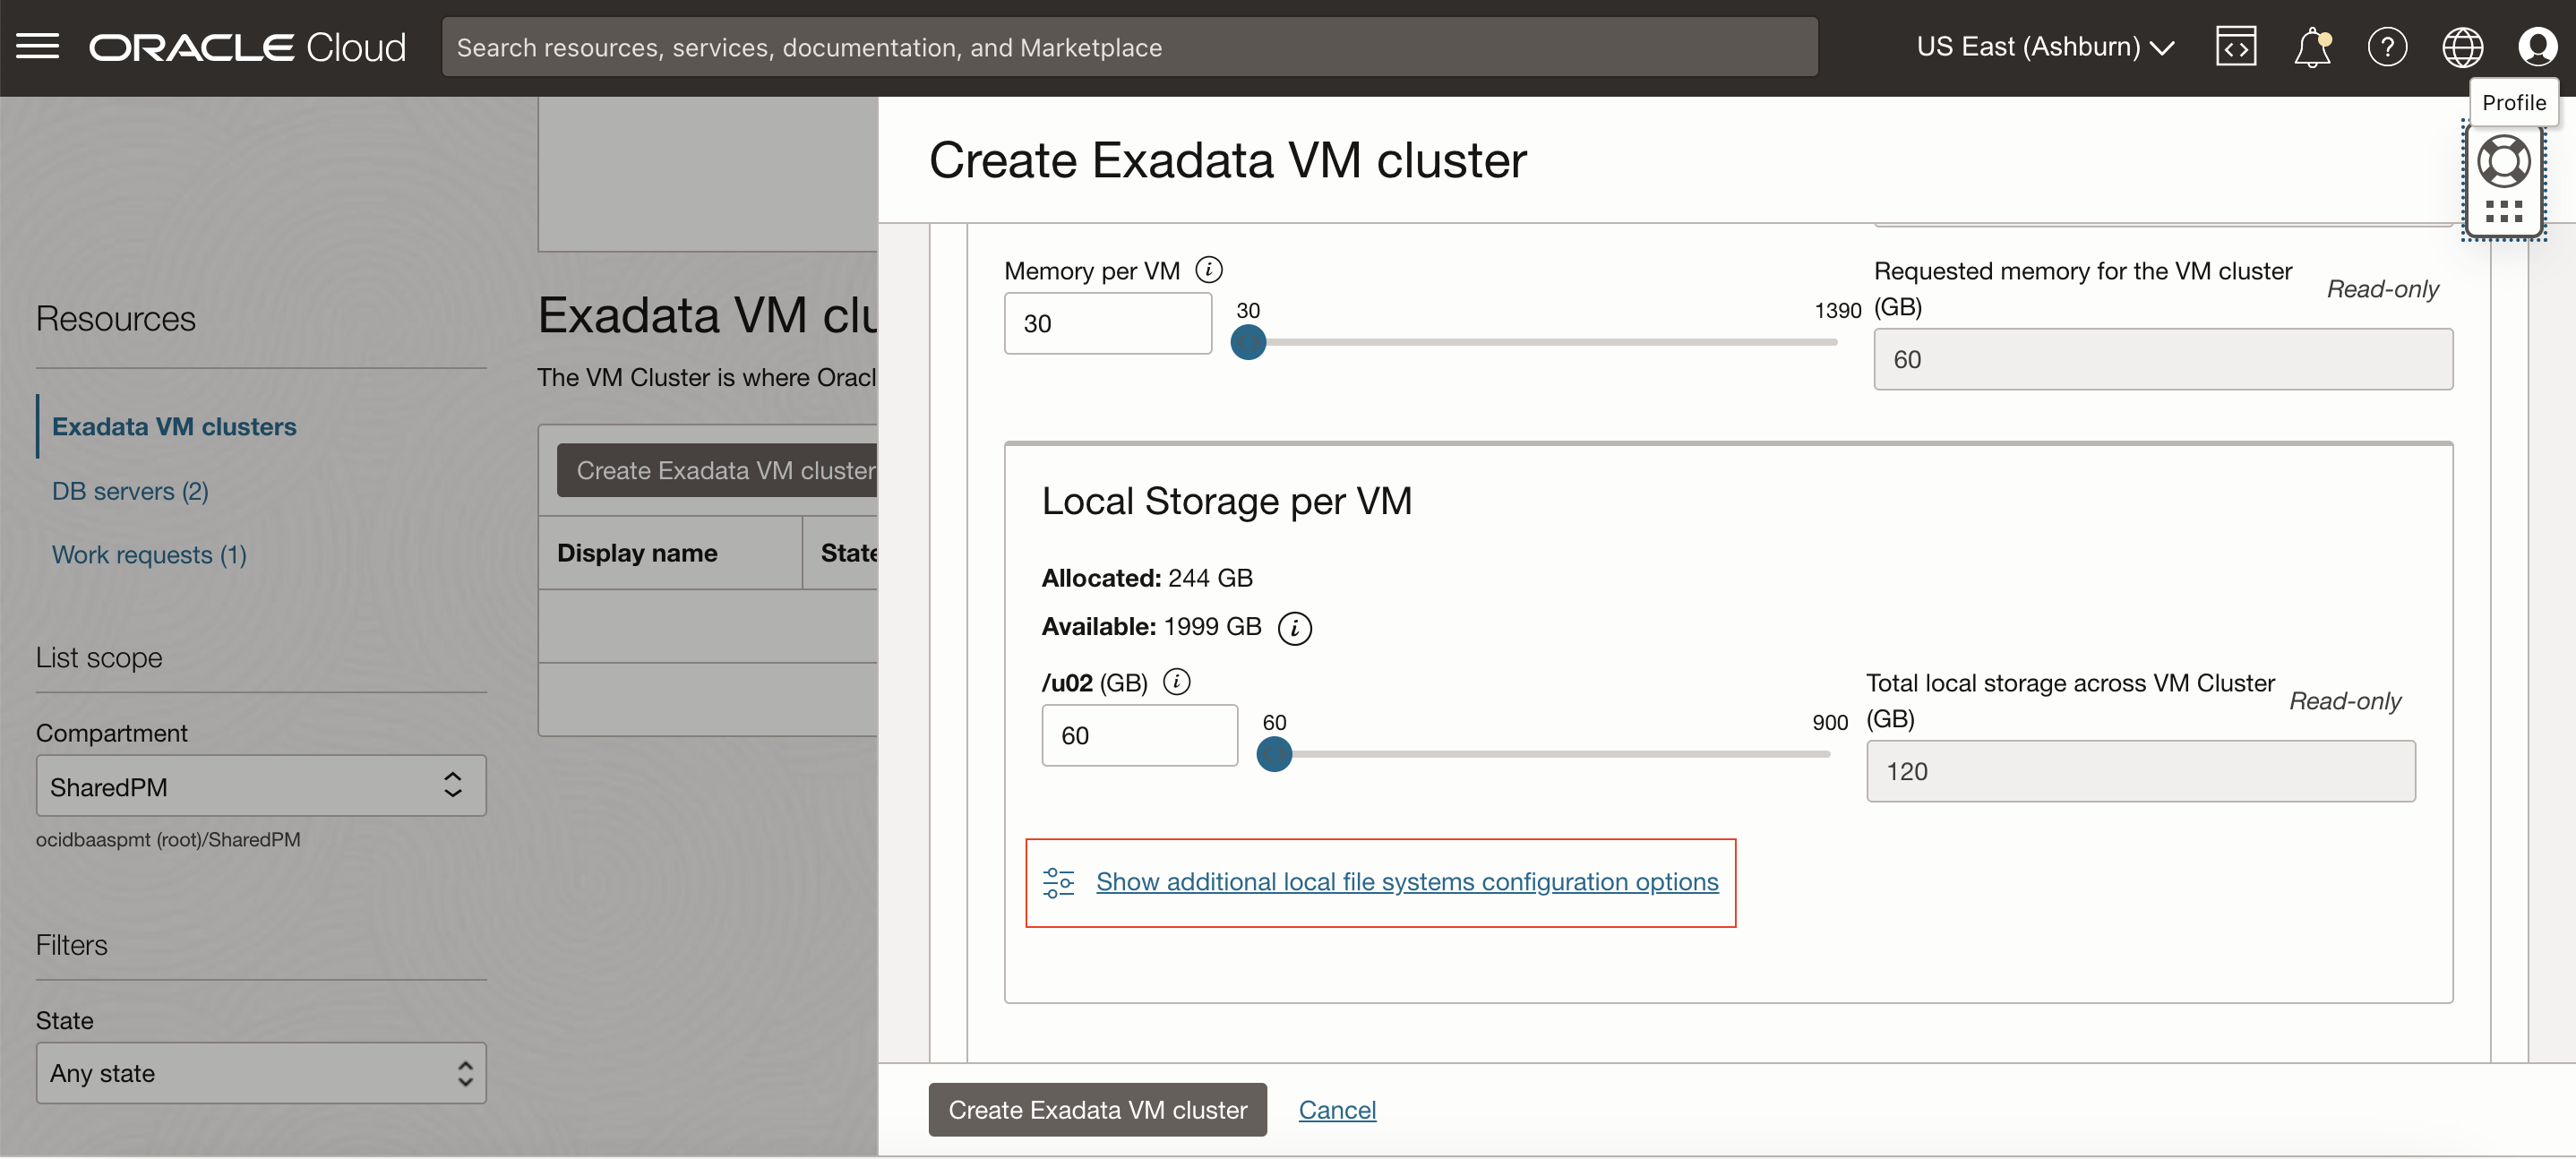 Image showing OCI Console Create Exadata VM cluster